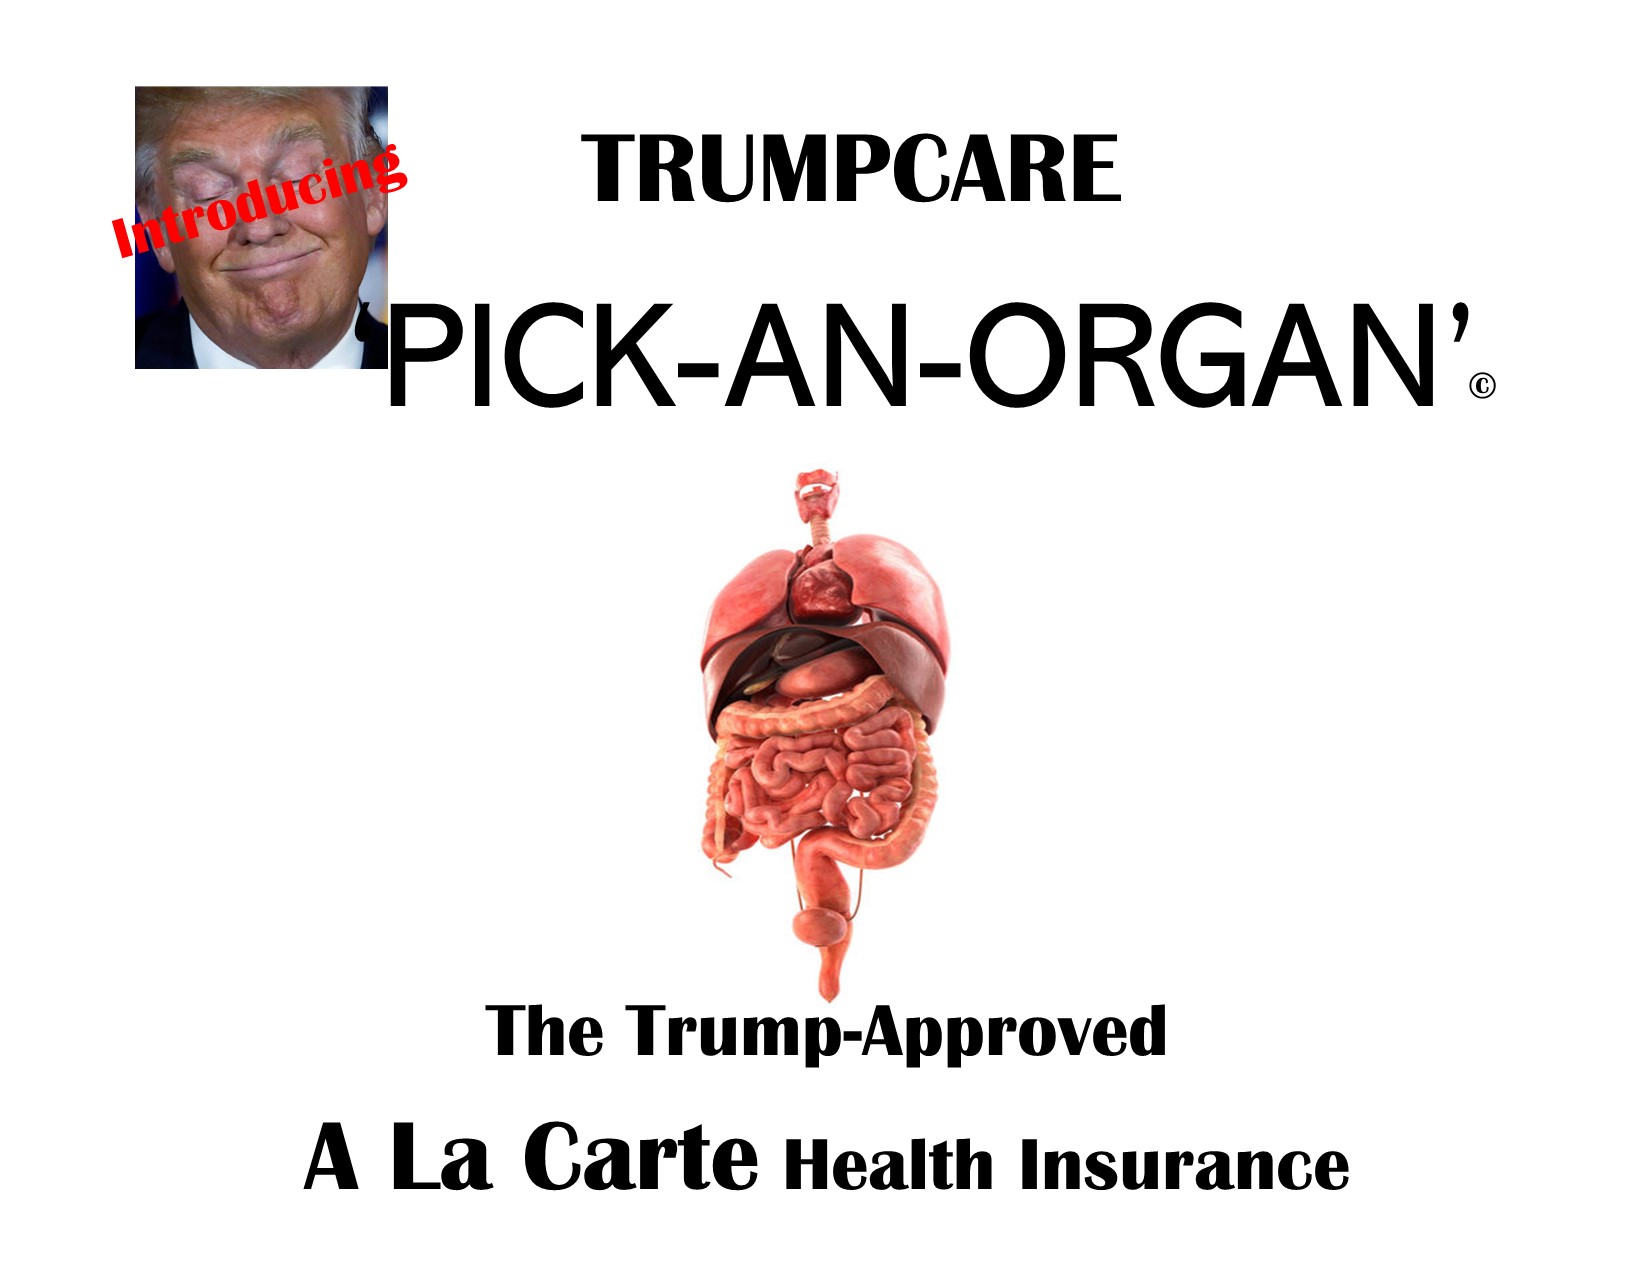 Breaking News: Trump HAS Been Working On A Health “Care” Plan: TrumpCare PICK-AN-ORGAN